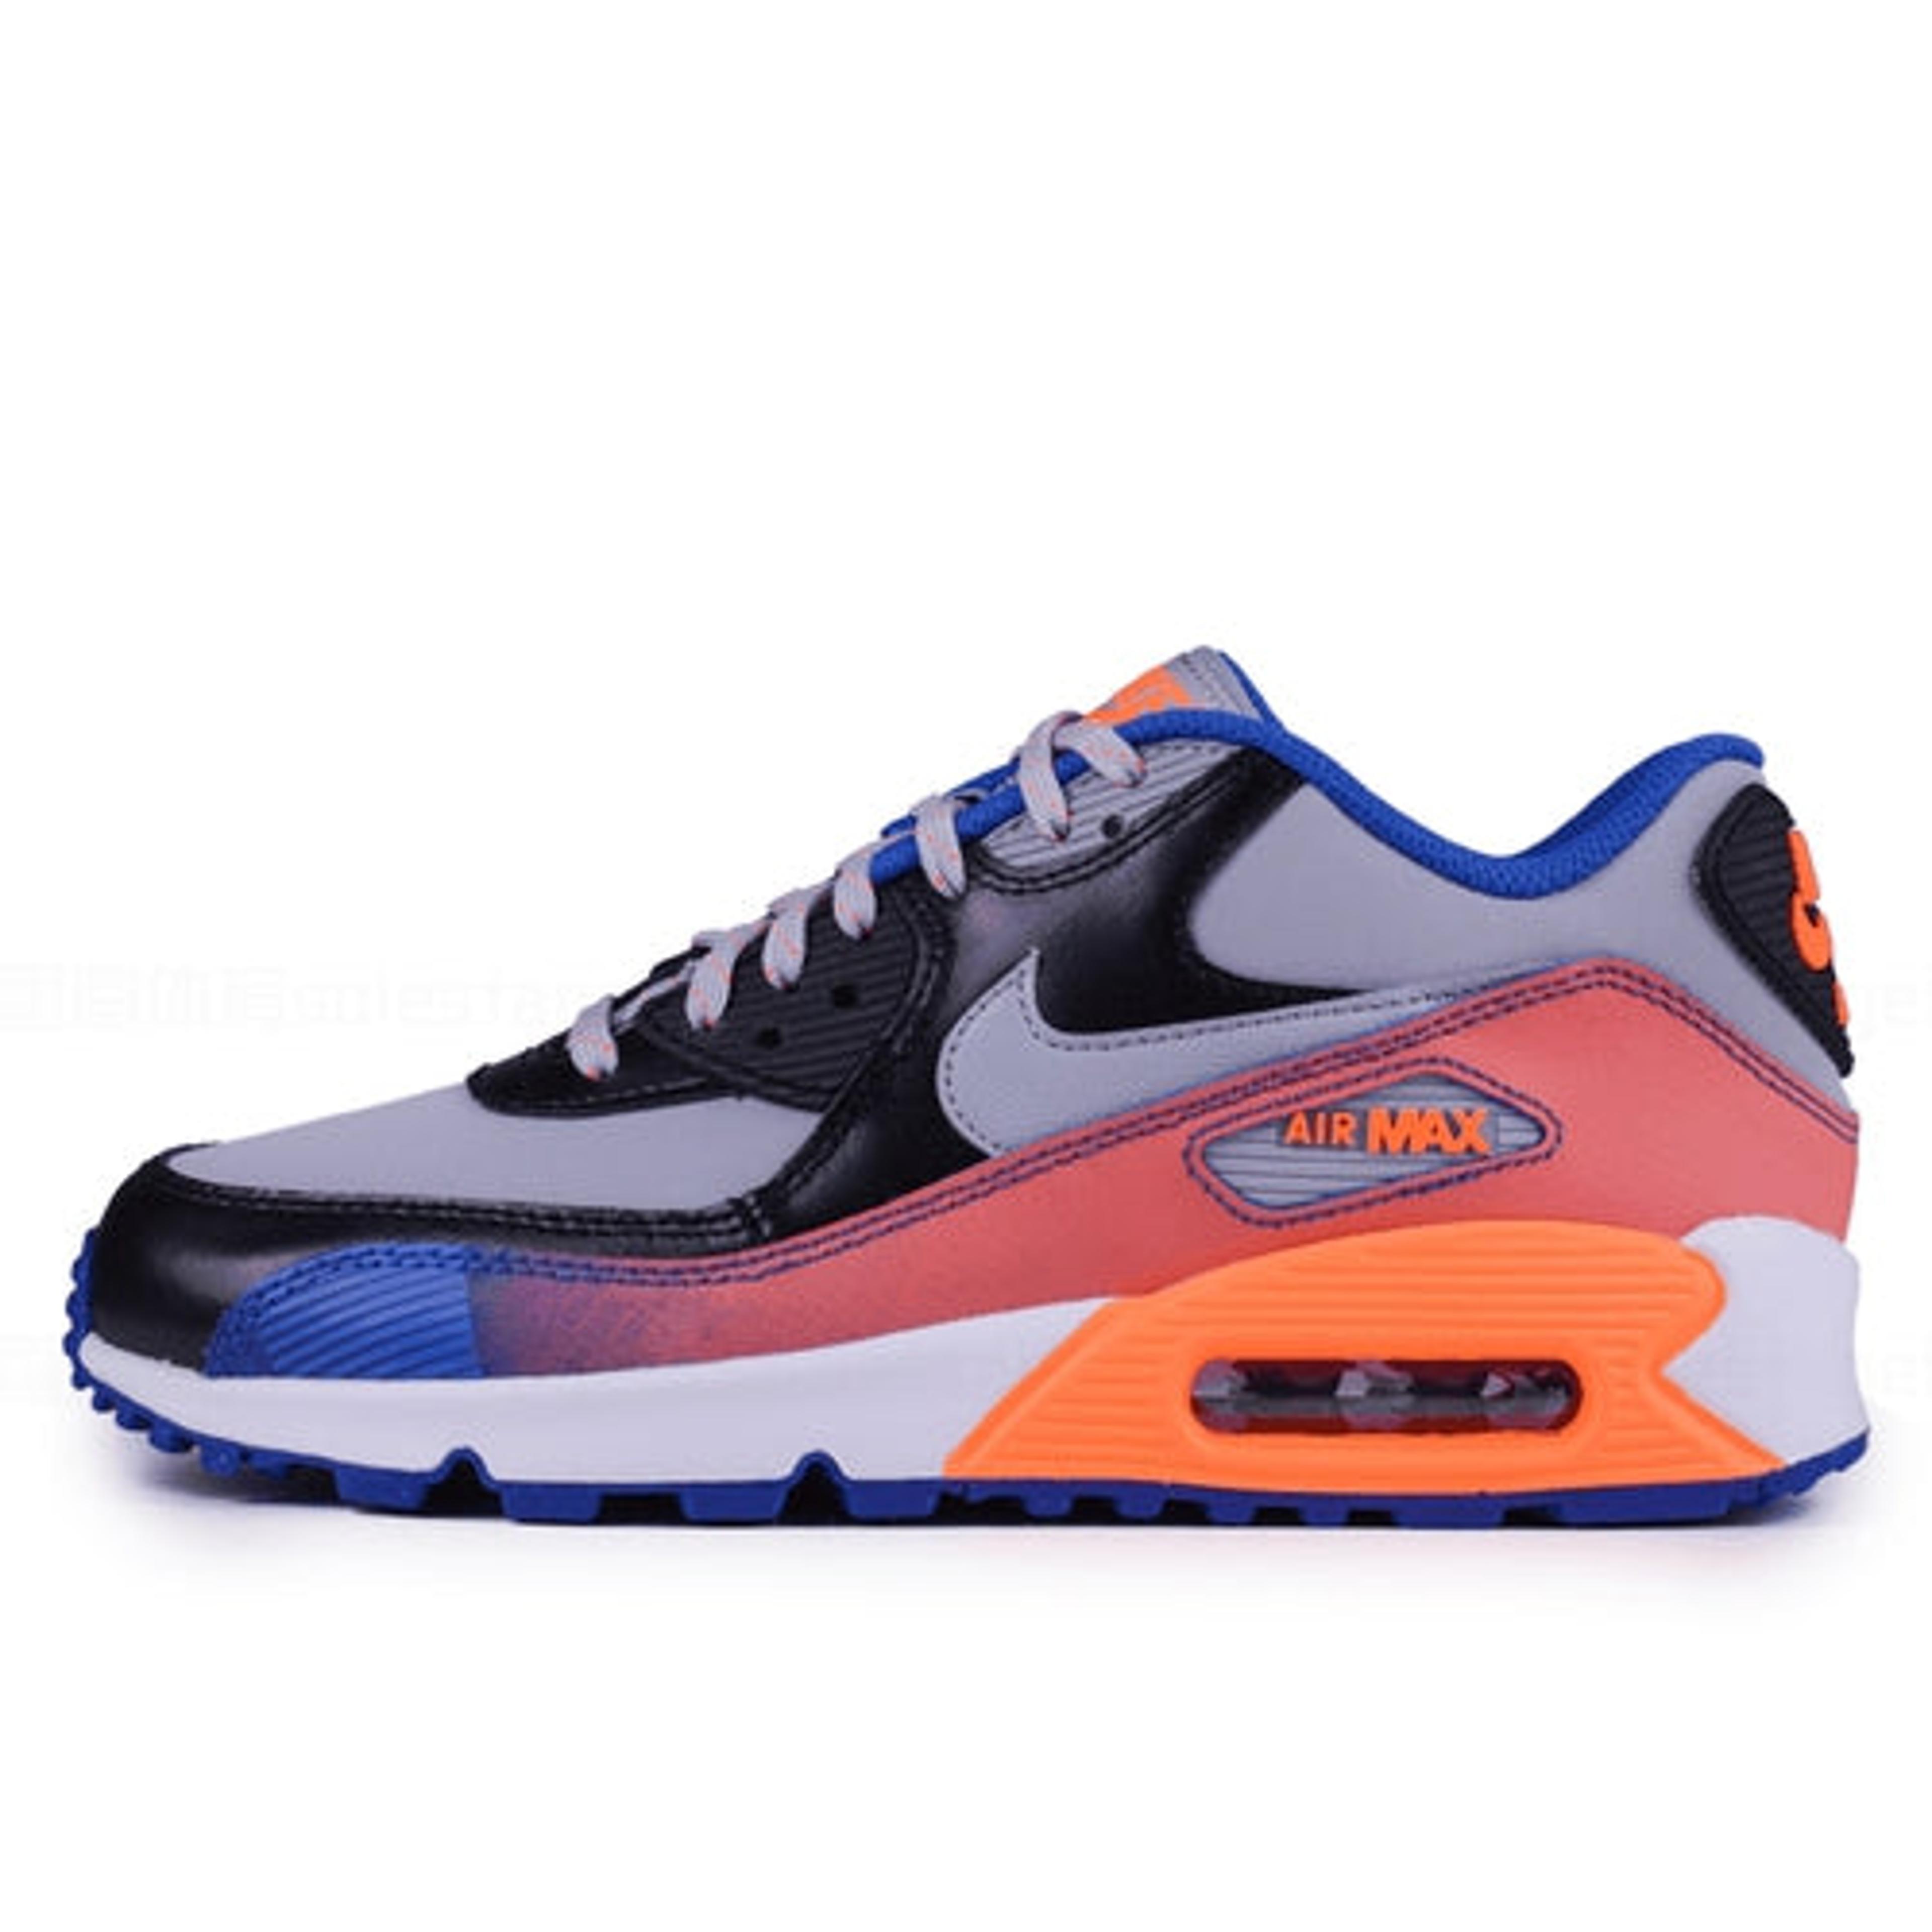 Nike Air Max 90 Premium Leather Multi Color GS (724879-002) Yout